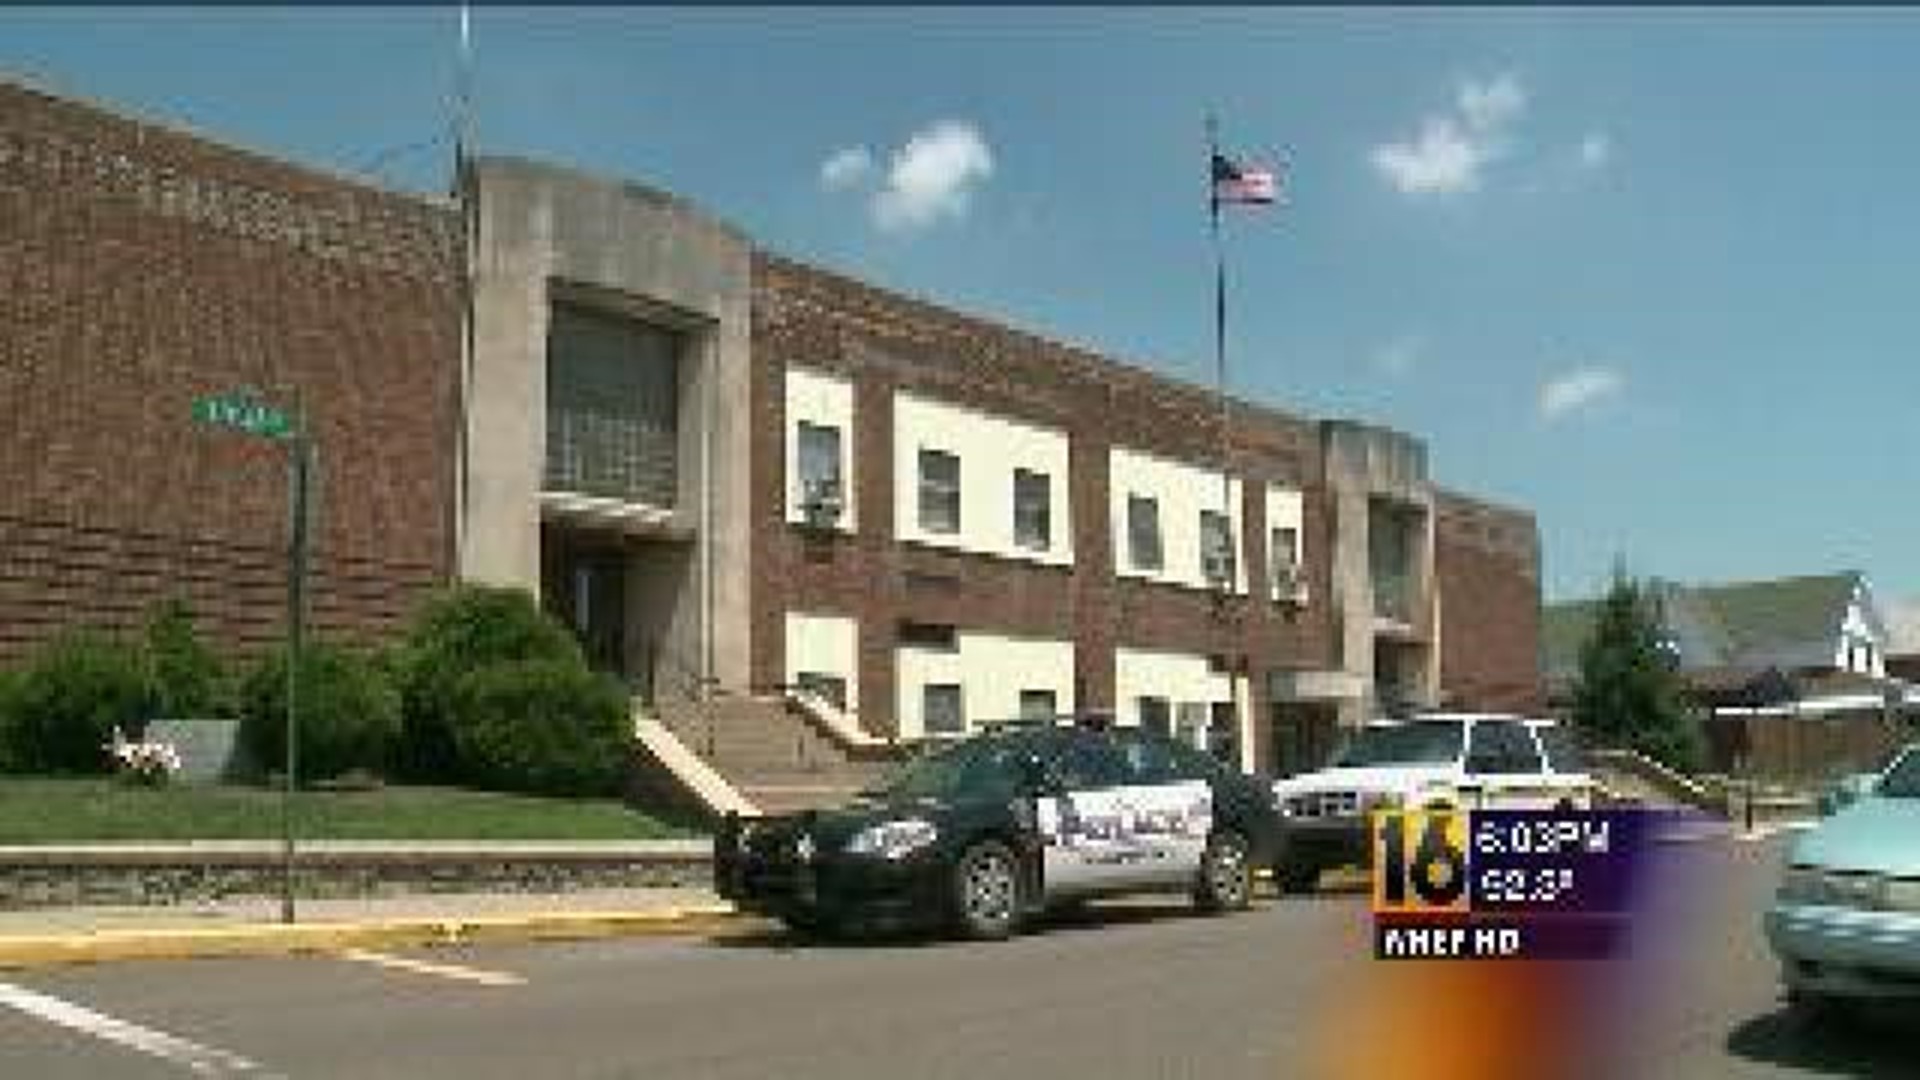 Kulpmont Police Department Temporarily Out of Service